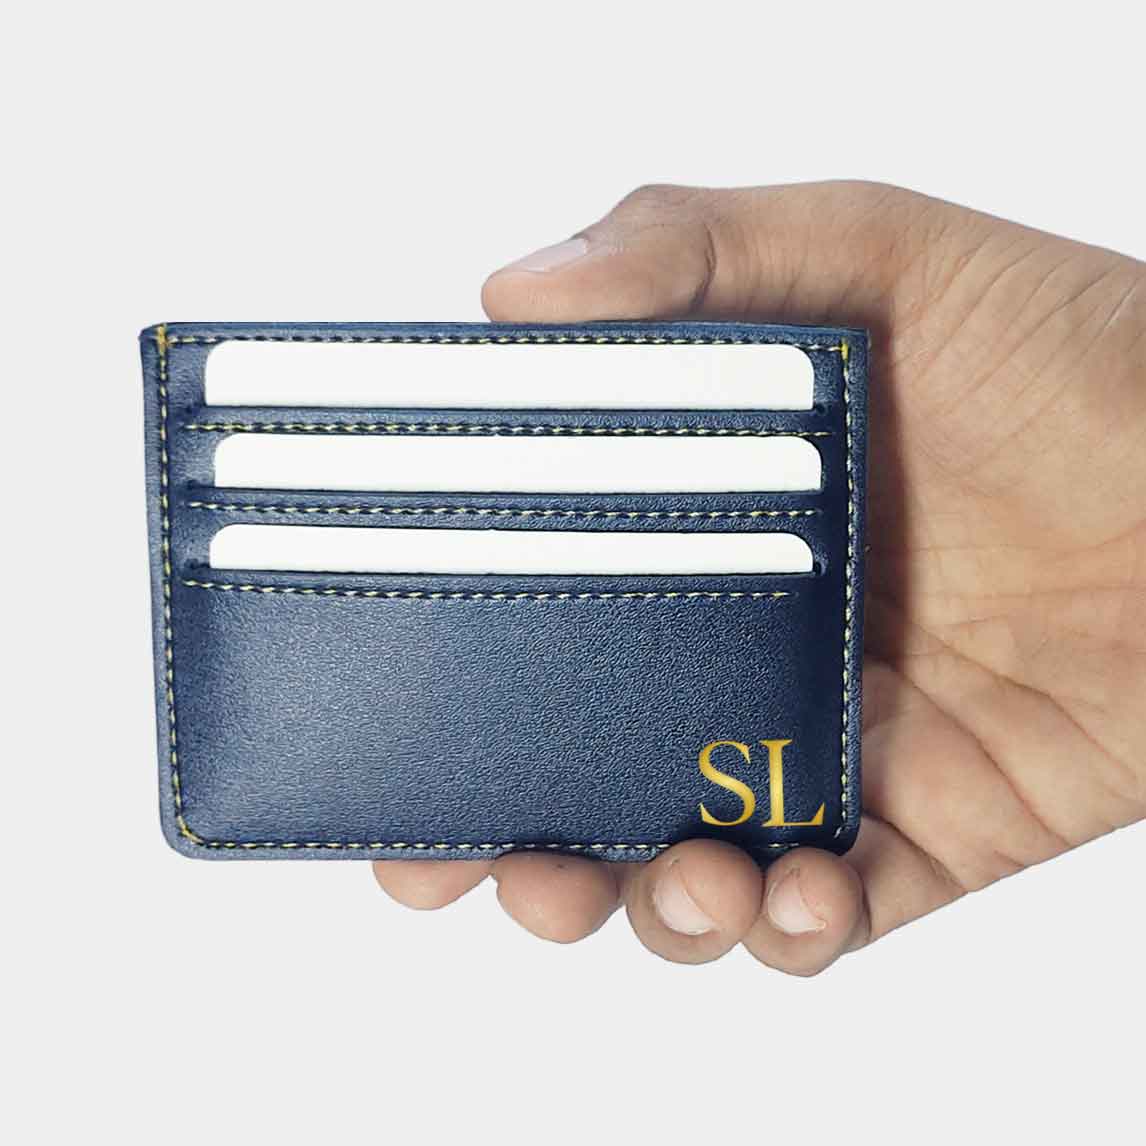 Personalised Credit Card Wallet Holder With Add Initials - Black Nutcase